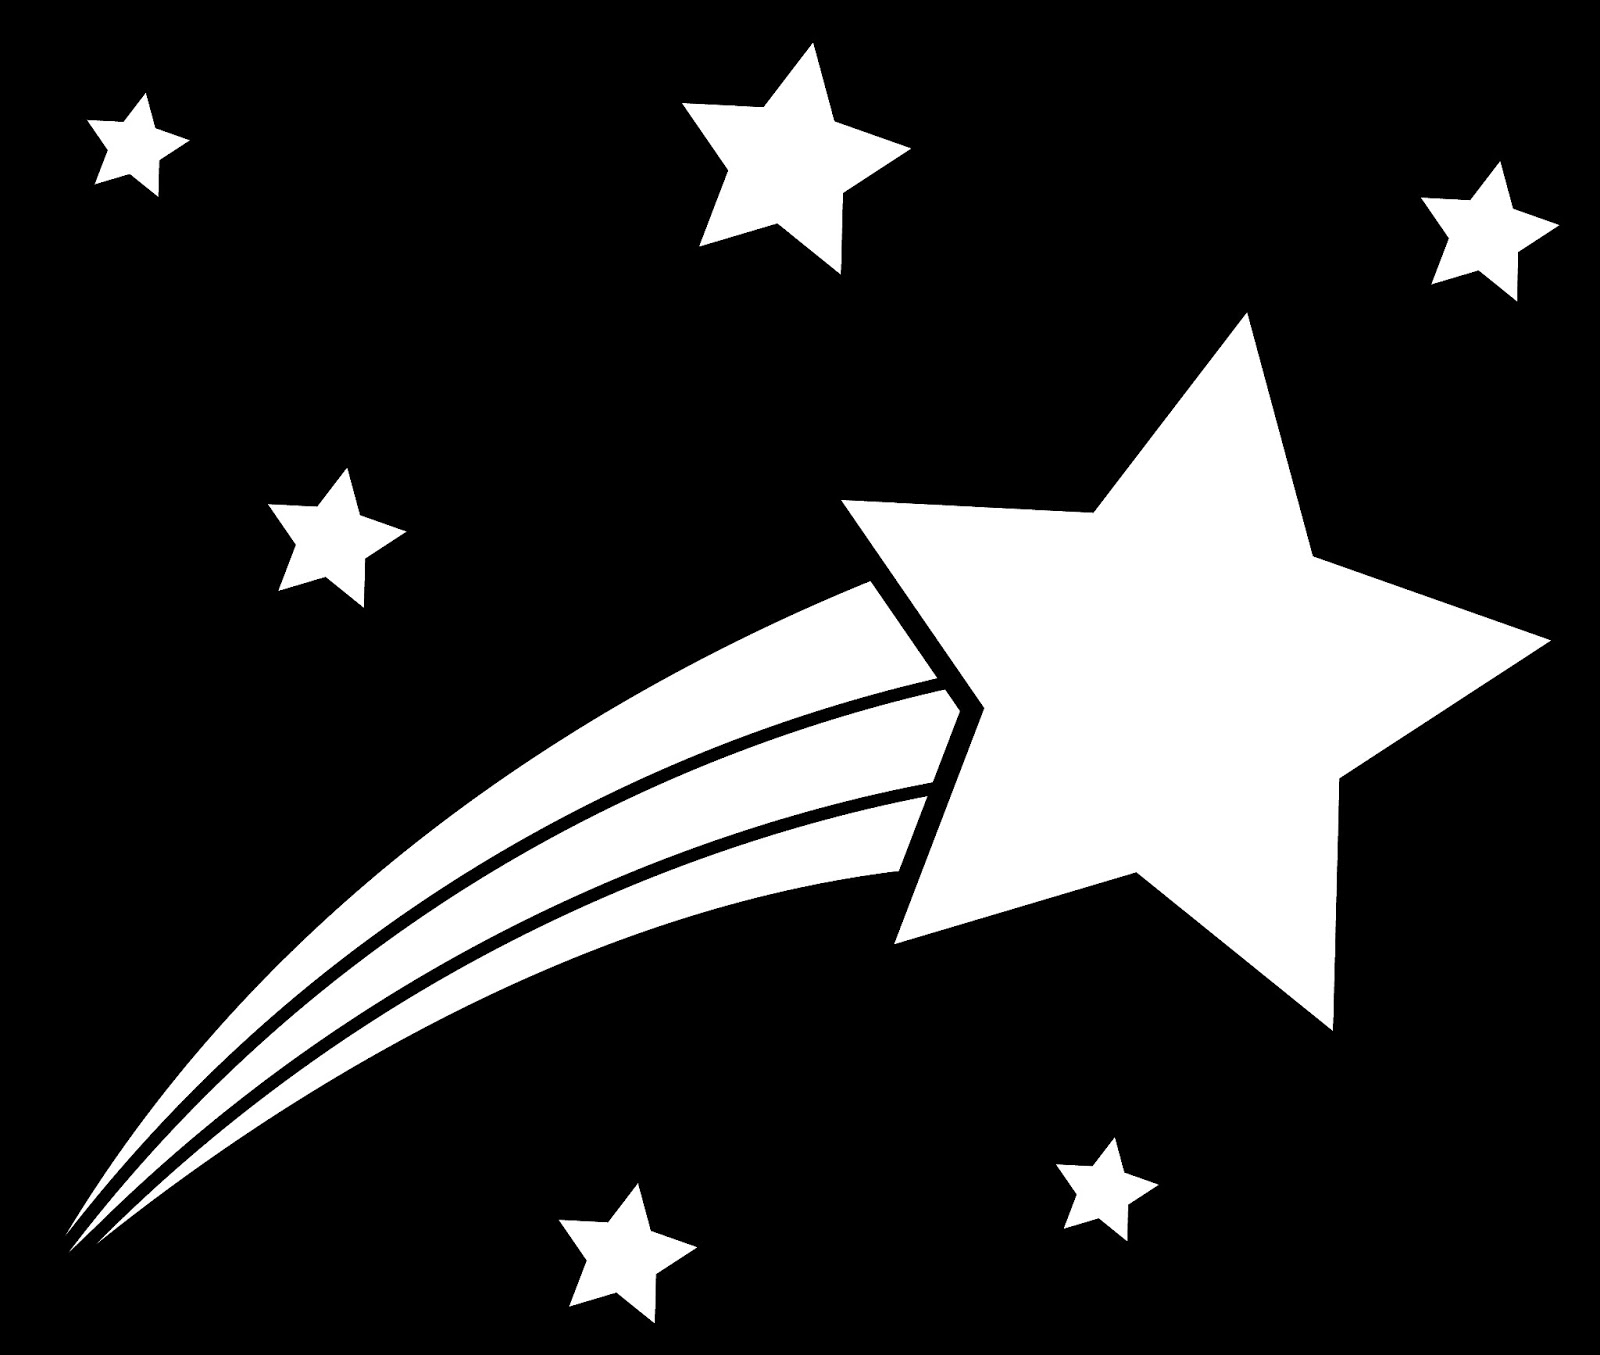 Shooting Star Clipart Black And White - ClipArt Best